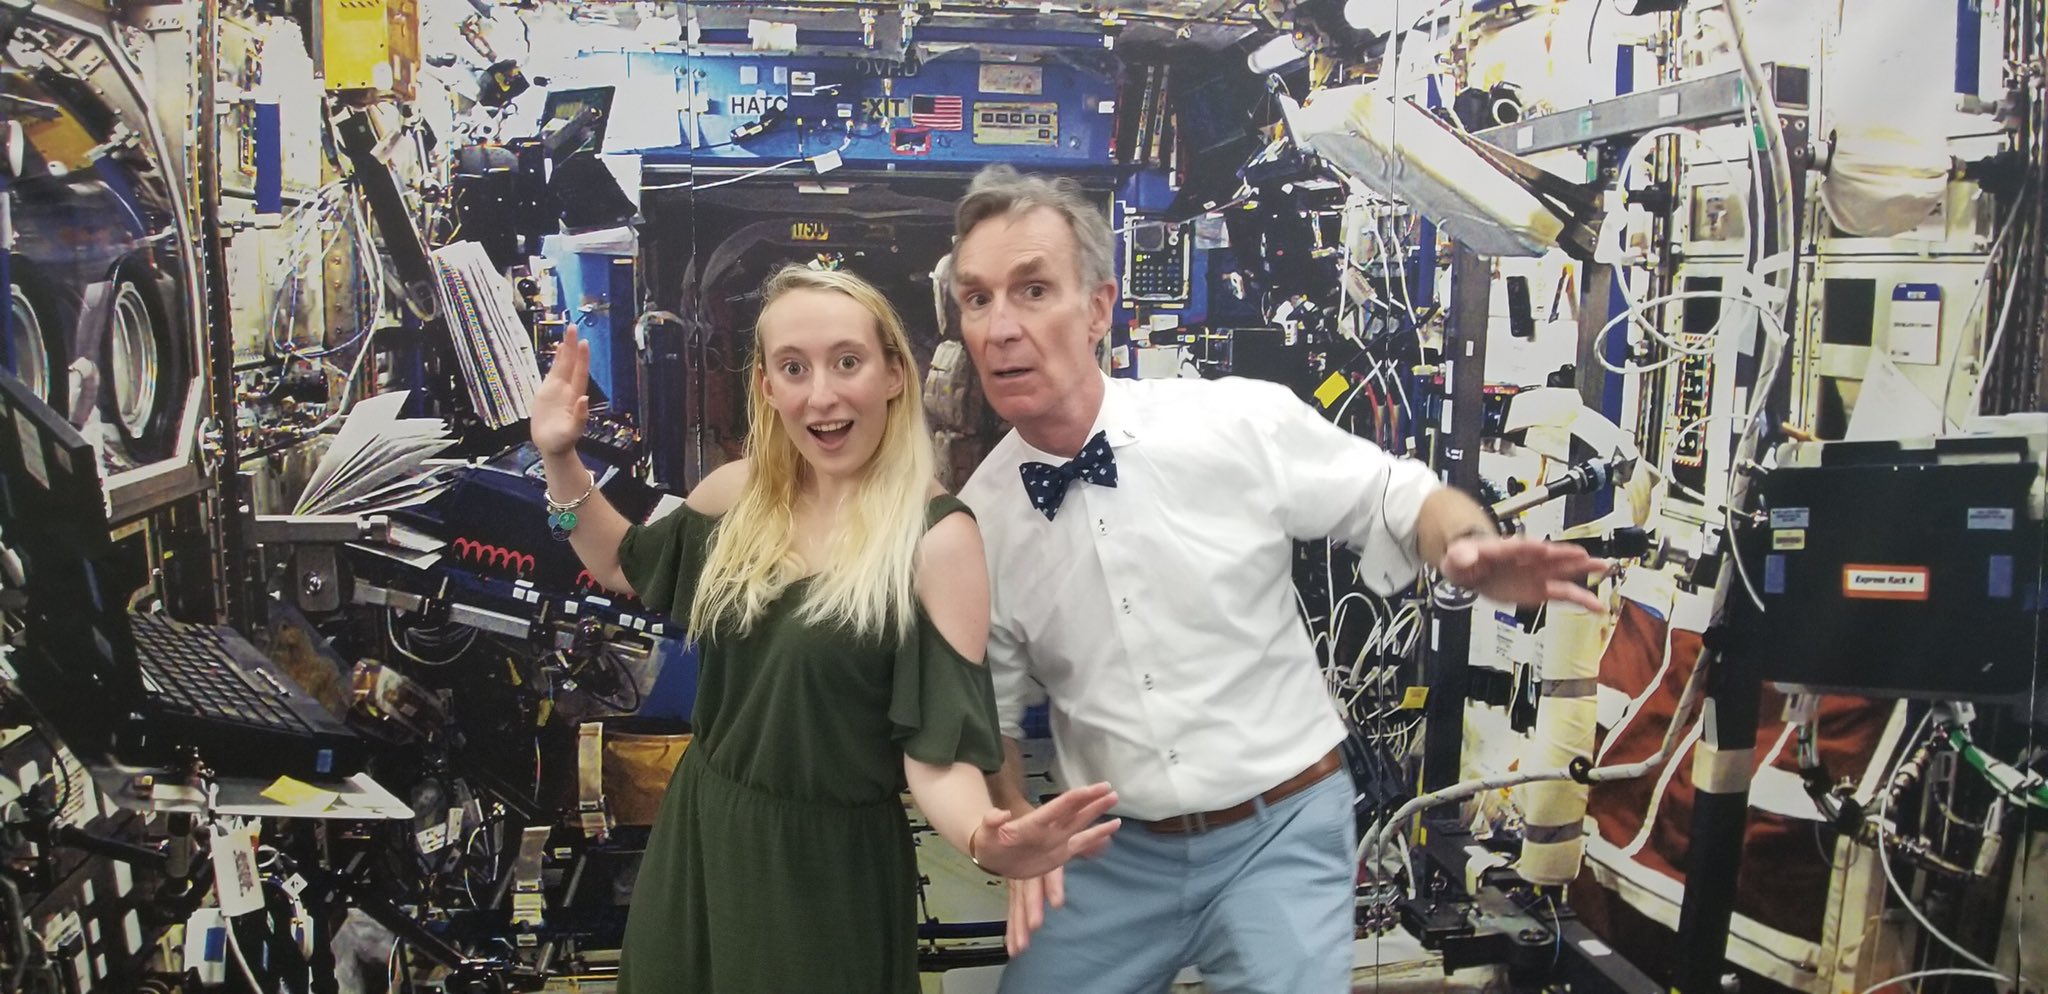 Teresa Spinelli (BSAE '17) was a mission manager for the Prox-1 mission led by Georgia Tech students. She was at the launch with Bill Nye, CEO of the Planetary Society. 